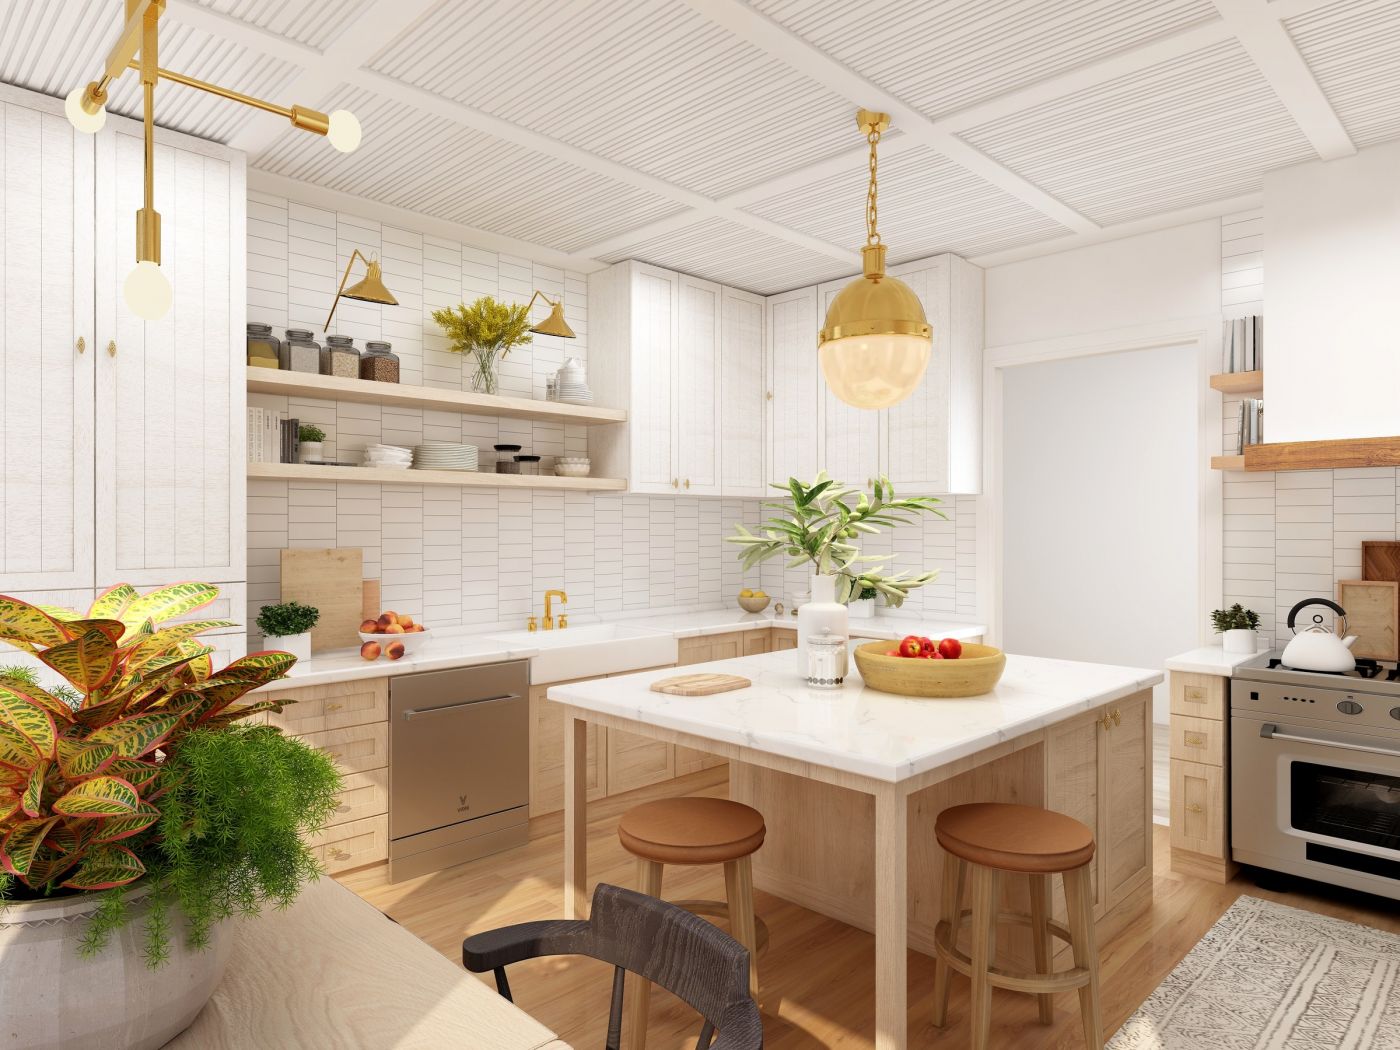 Add value to your kitchen with these DIY tips